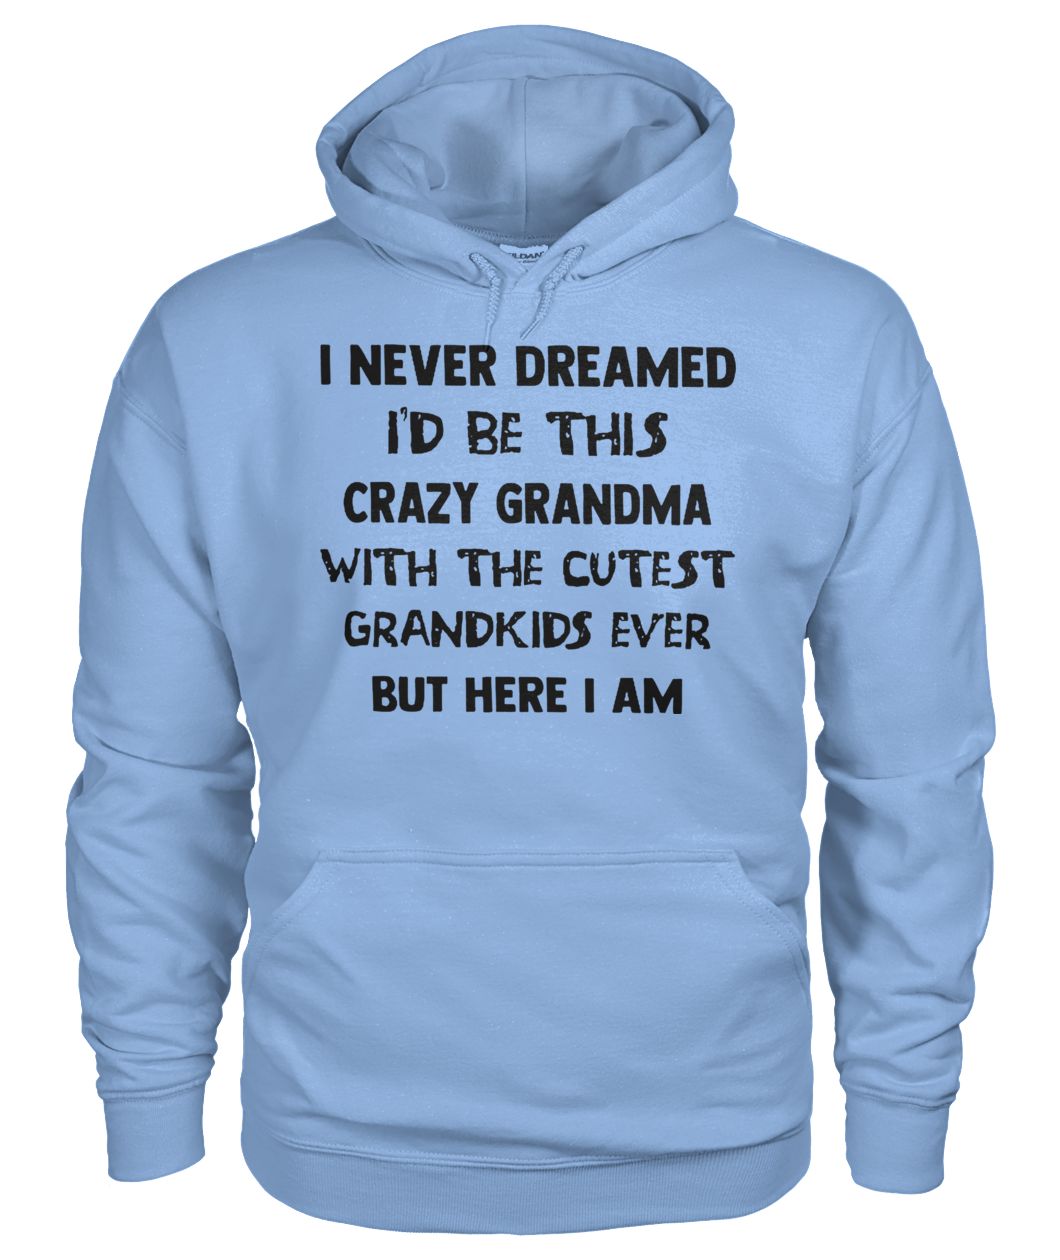 I never dreamed I'd be this crazy grandma with the cutest grandkids ever but here I am gildan hoodie